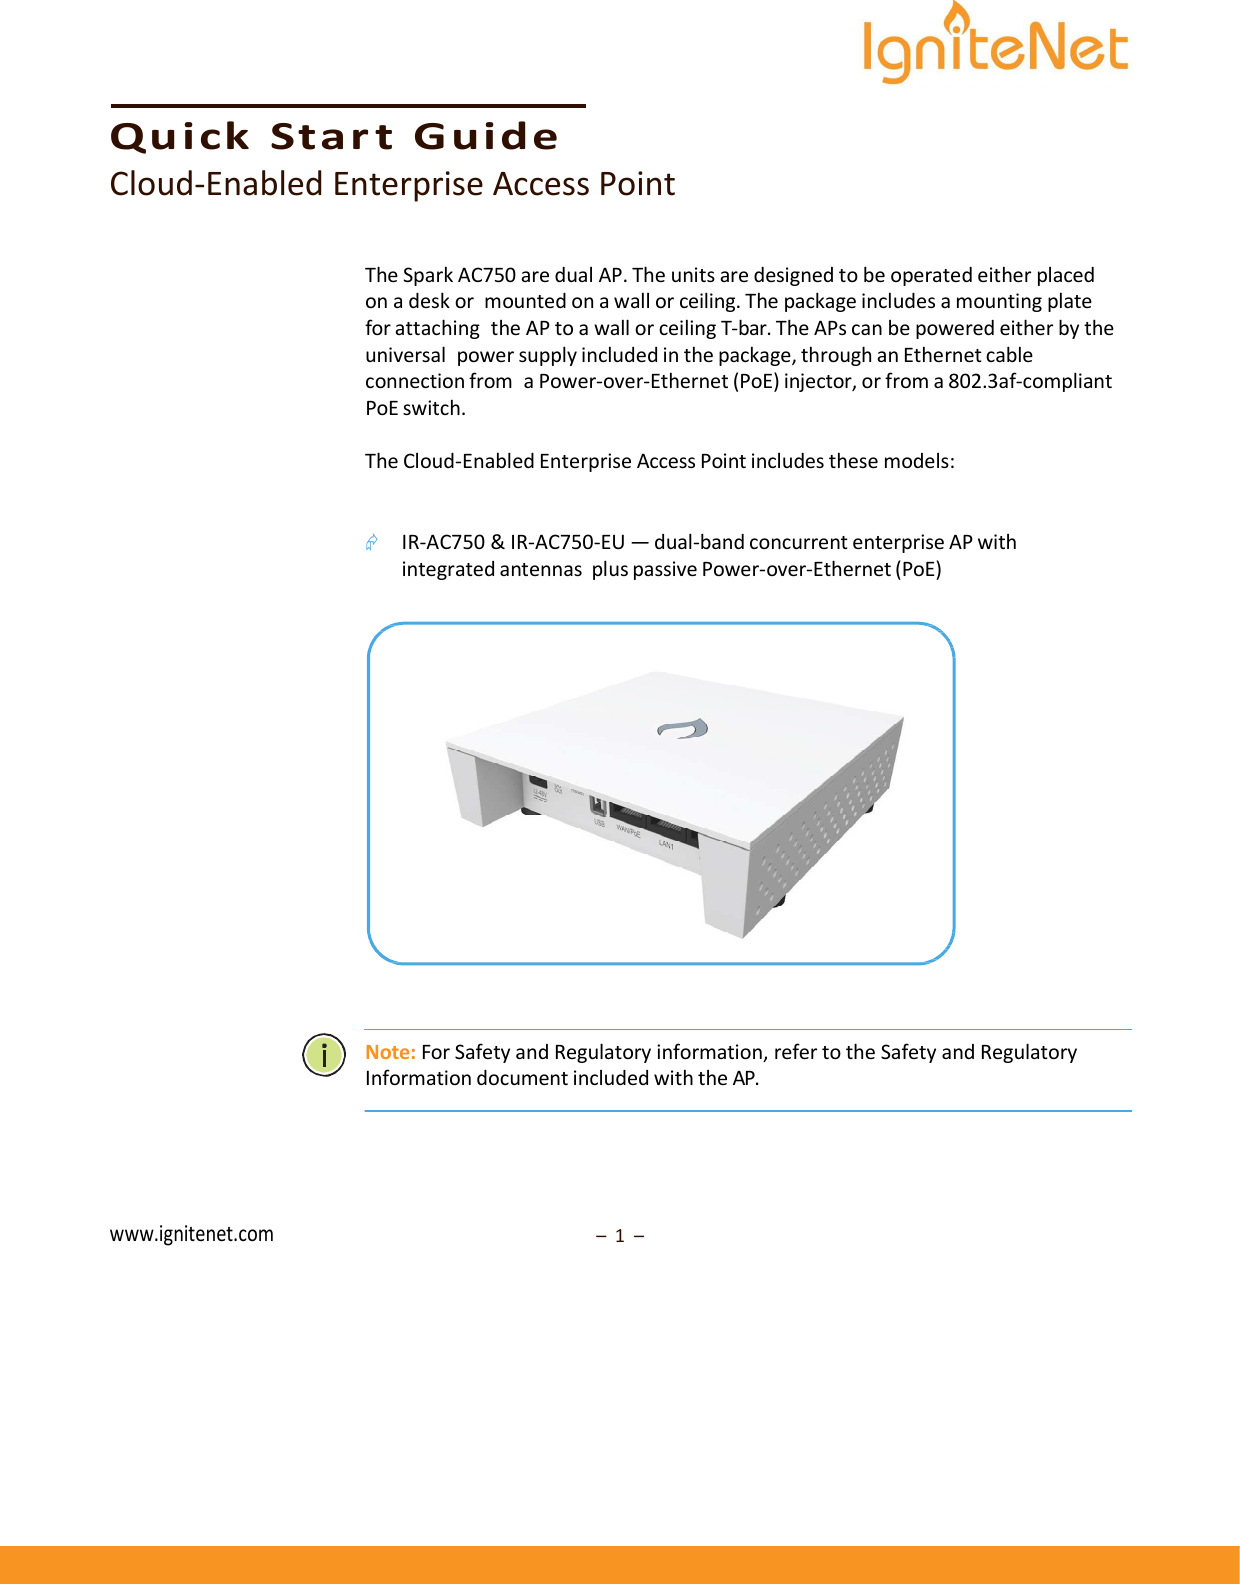      Quick  Star t  Guide Cloud-Enabled Enterprise Access Point   The Spark AC750 are dual AP. The units are designed to be operated either placed on a desk or mounted on a wall or ceiling. The package includes a mounting plate for attaching the AP to a wall or ceiling T-bar. The APs can be powered either by the universal power supply included in the package, through an Ethernet cable connection from a Power-over-Ethernet (PoE) injector, or from a 802.3af-compliant PoE switch.  The Cloud-Enabled Enterprise Access Point includes these models:    IR-AC750 &amp; IR-AC750-EU — dual-band concurrent enterprise AP with integrated antennas plus passive Power-over-Ethernet (PoE)       Note: For Safety and Regulatory information, refer to the Safety and Regulatory Information document included with the AP.       www.ignitenet.com –  1  – 